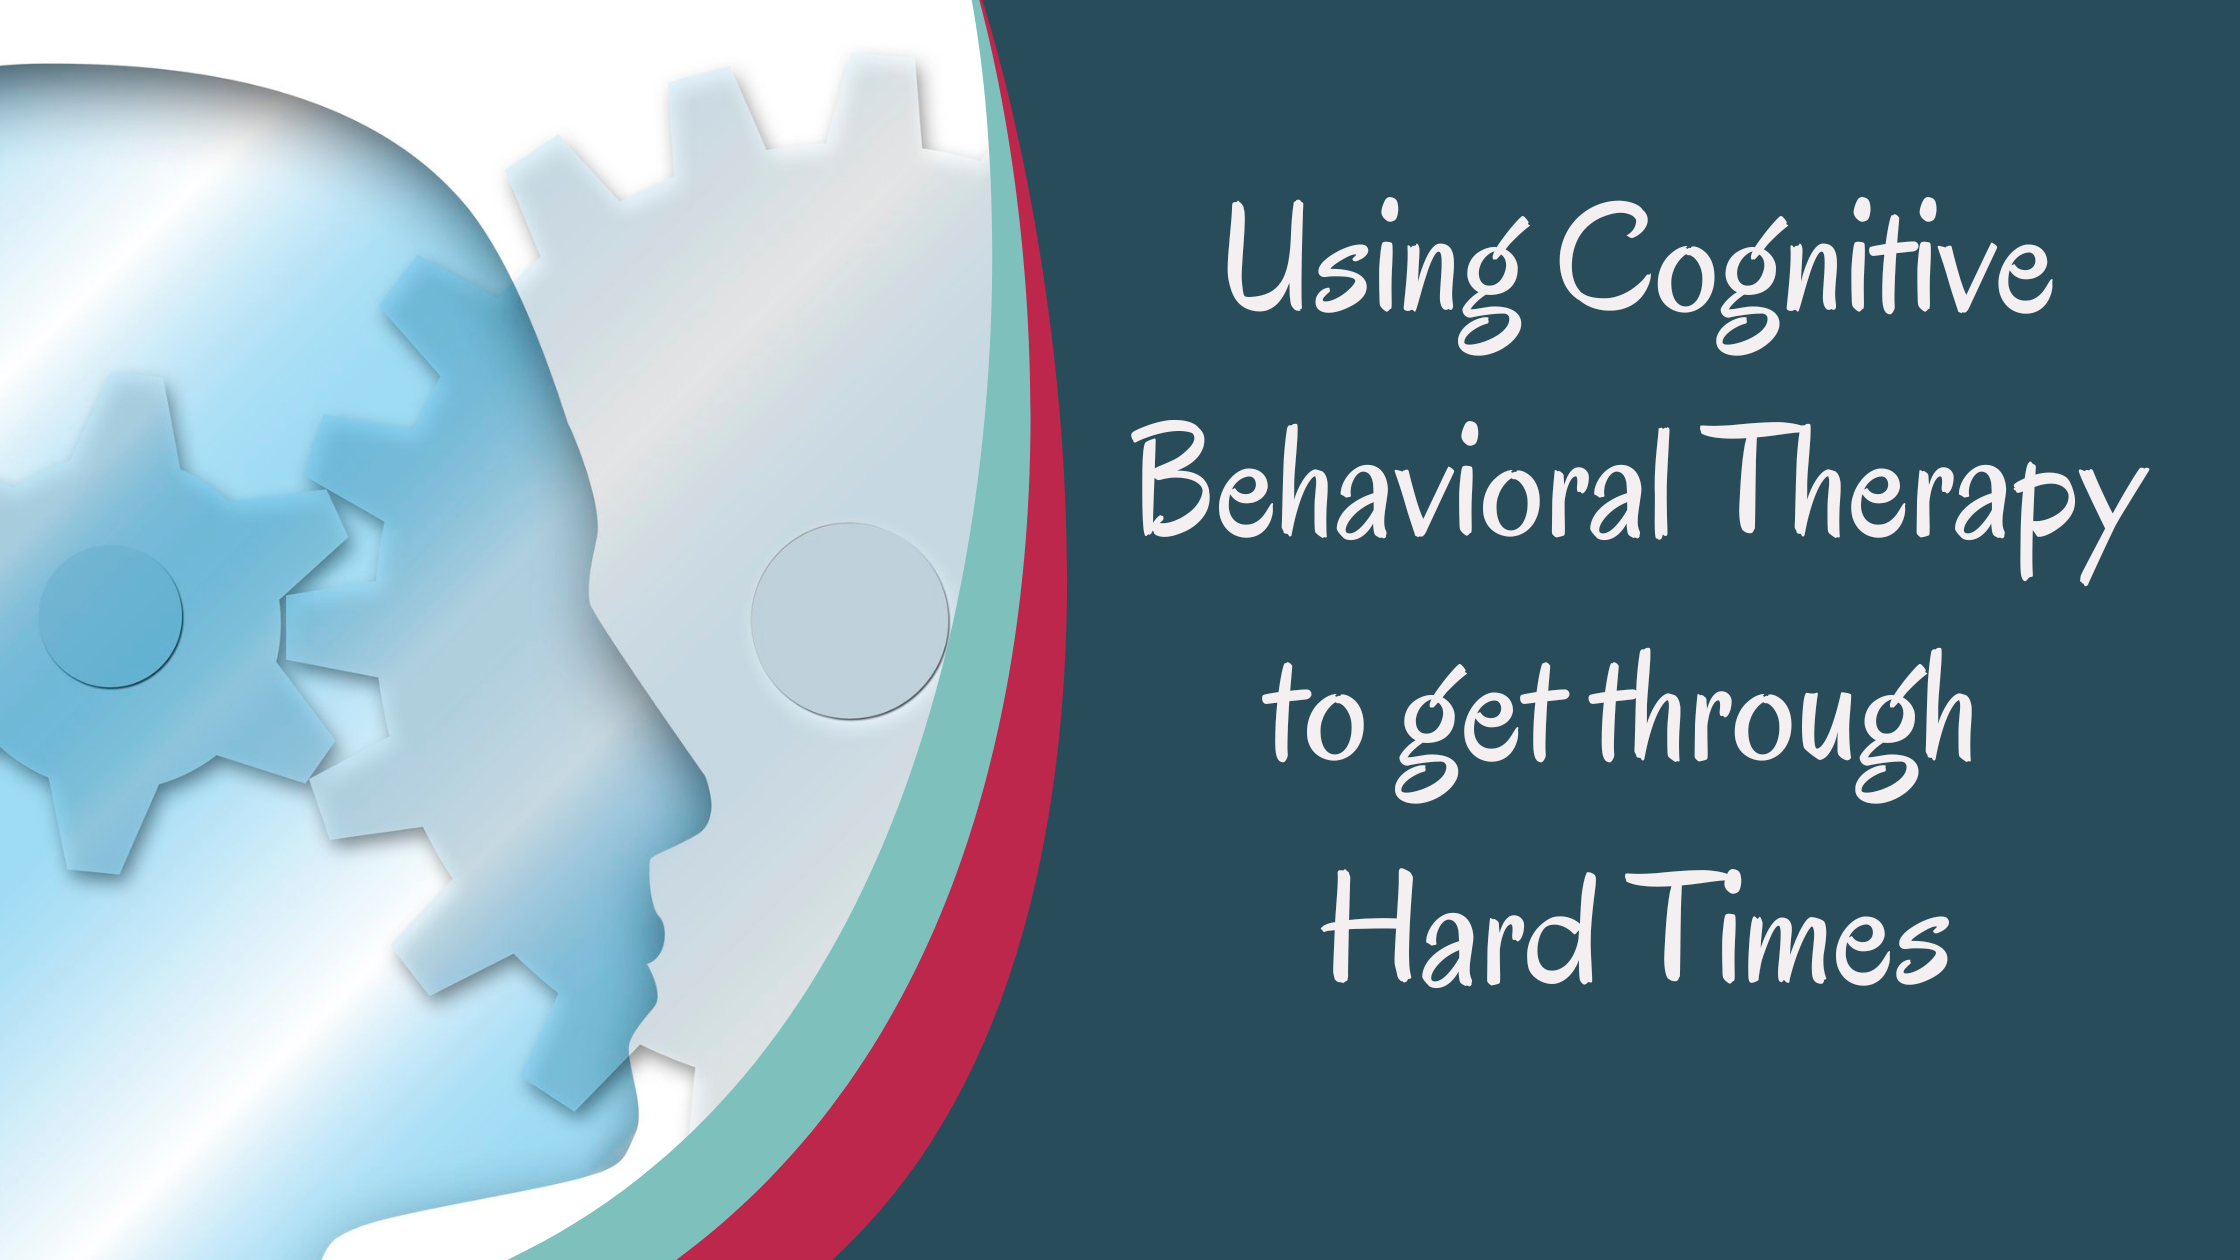 Using CBT to get through Hard Times